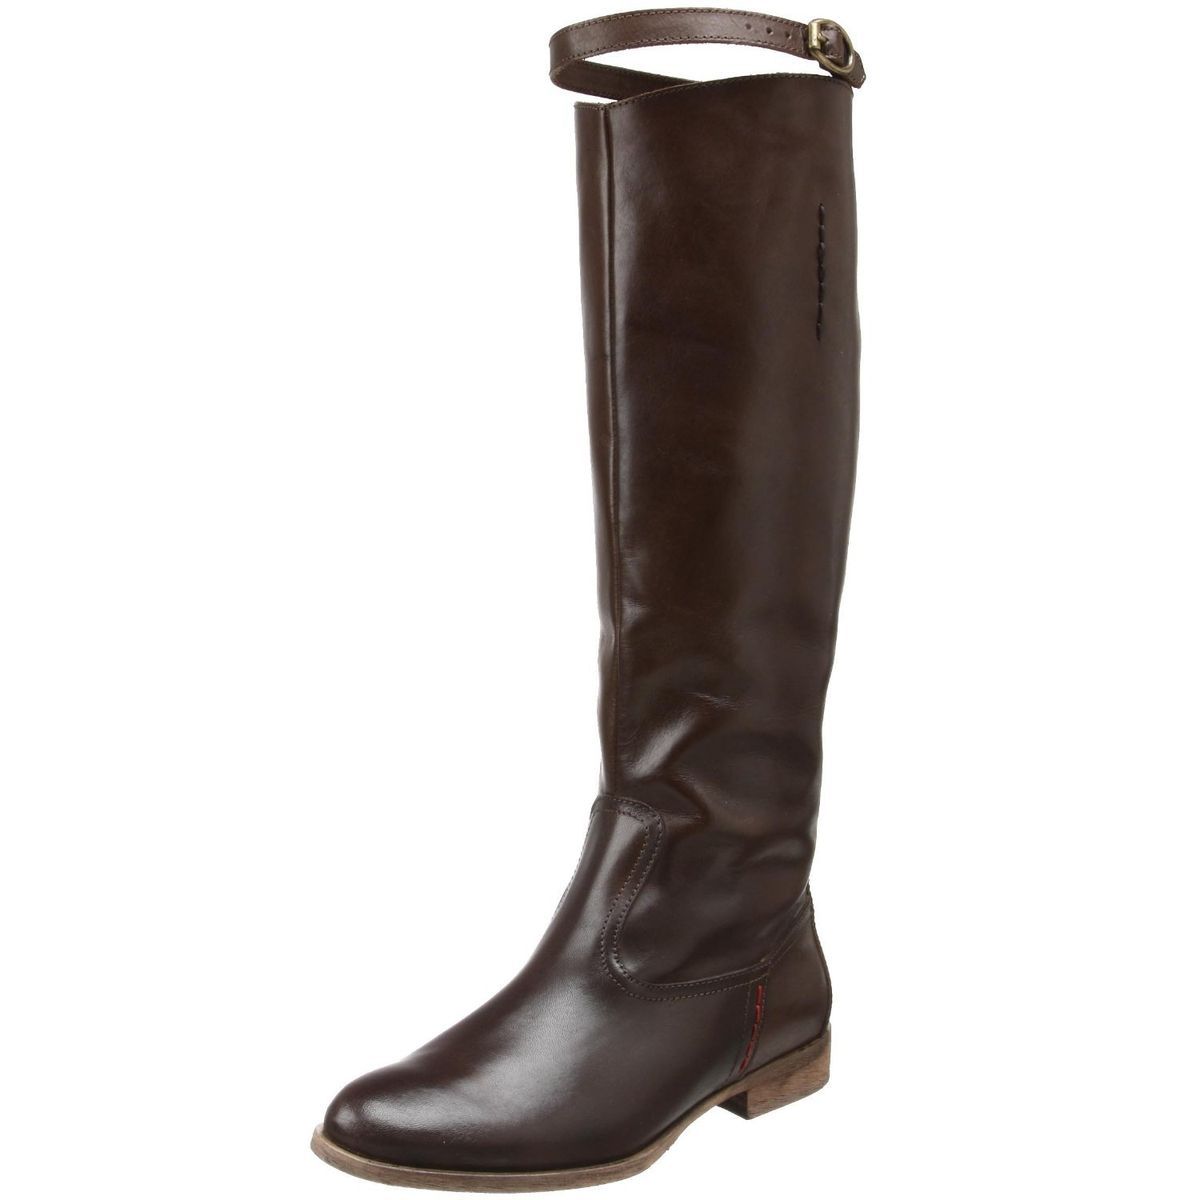 New Charles David Rouse Womens Leather Knee High Flat Riding Boots 